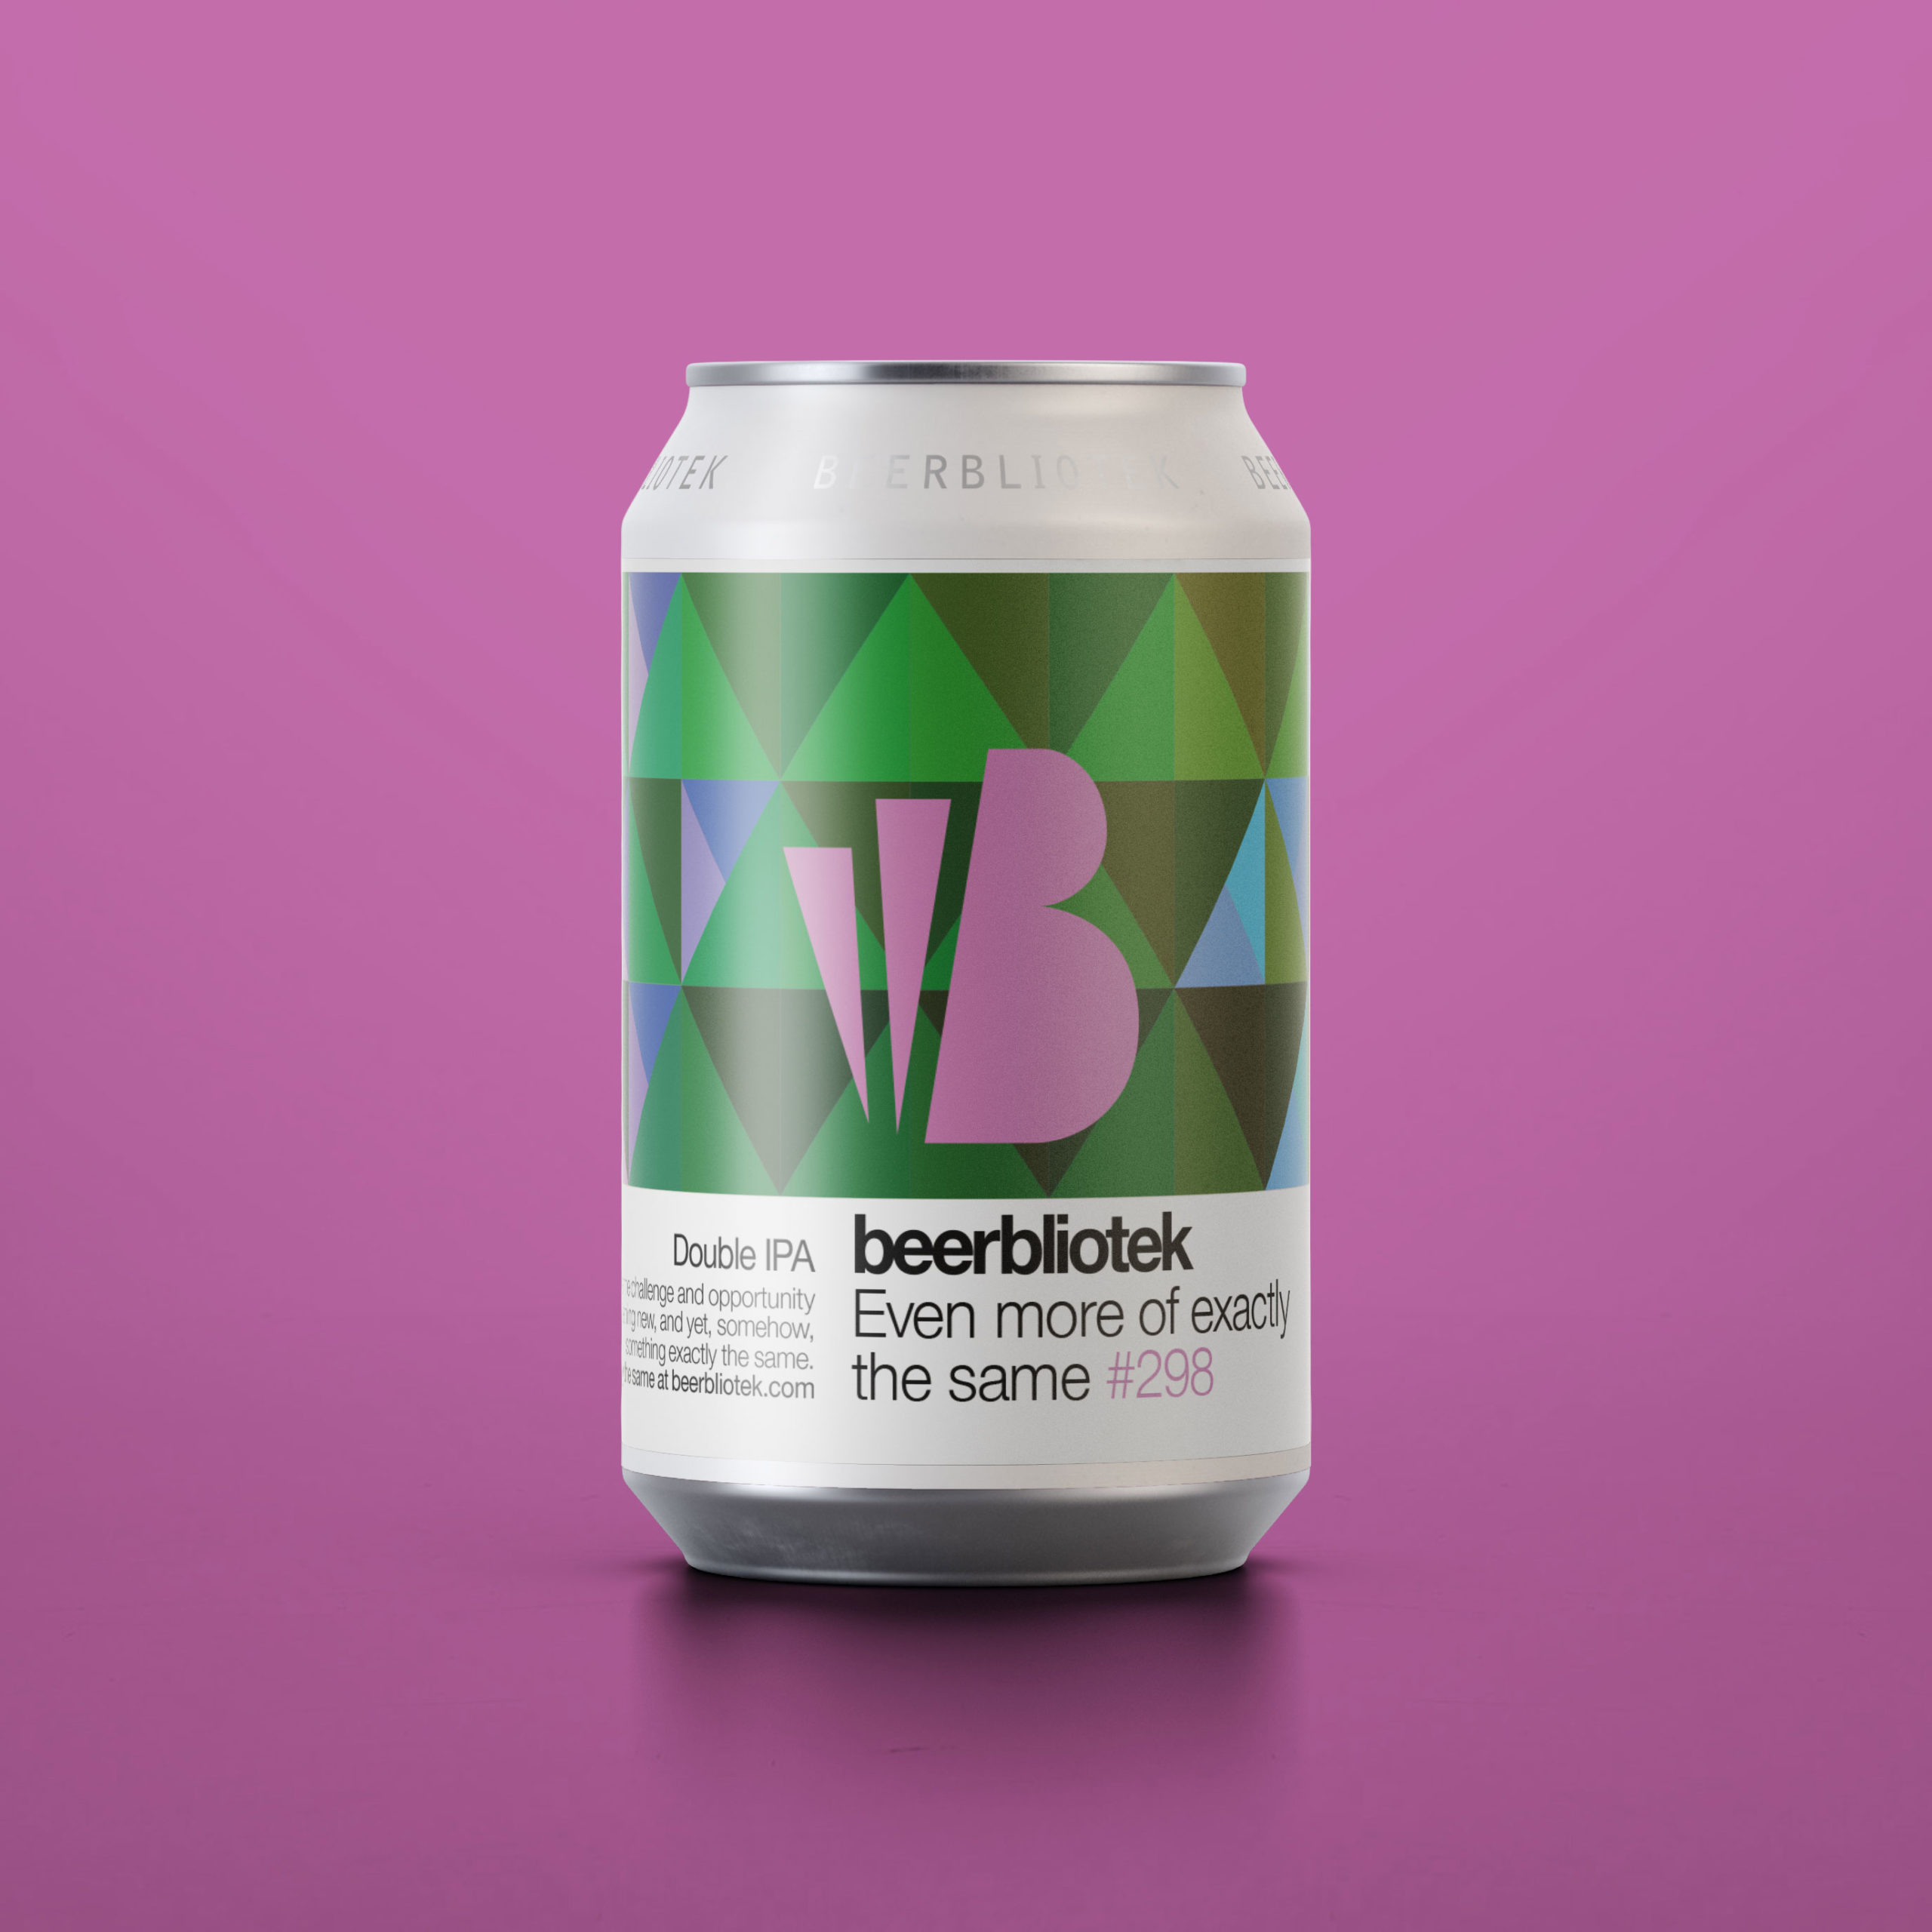 A can marketing ppackshot of a Double IPA, Even more of exactly the same, brewed in Sweden by Craft Brewery Beerbliotek.